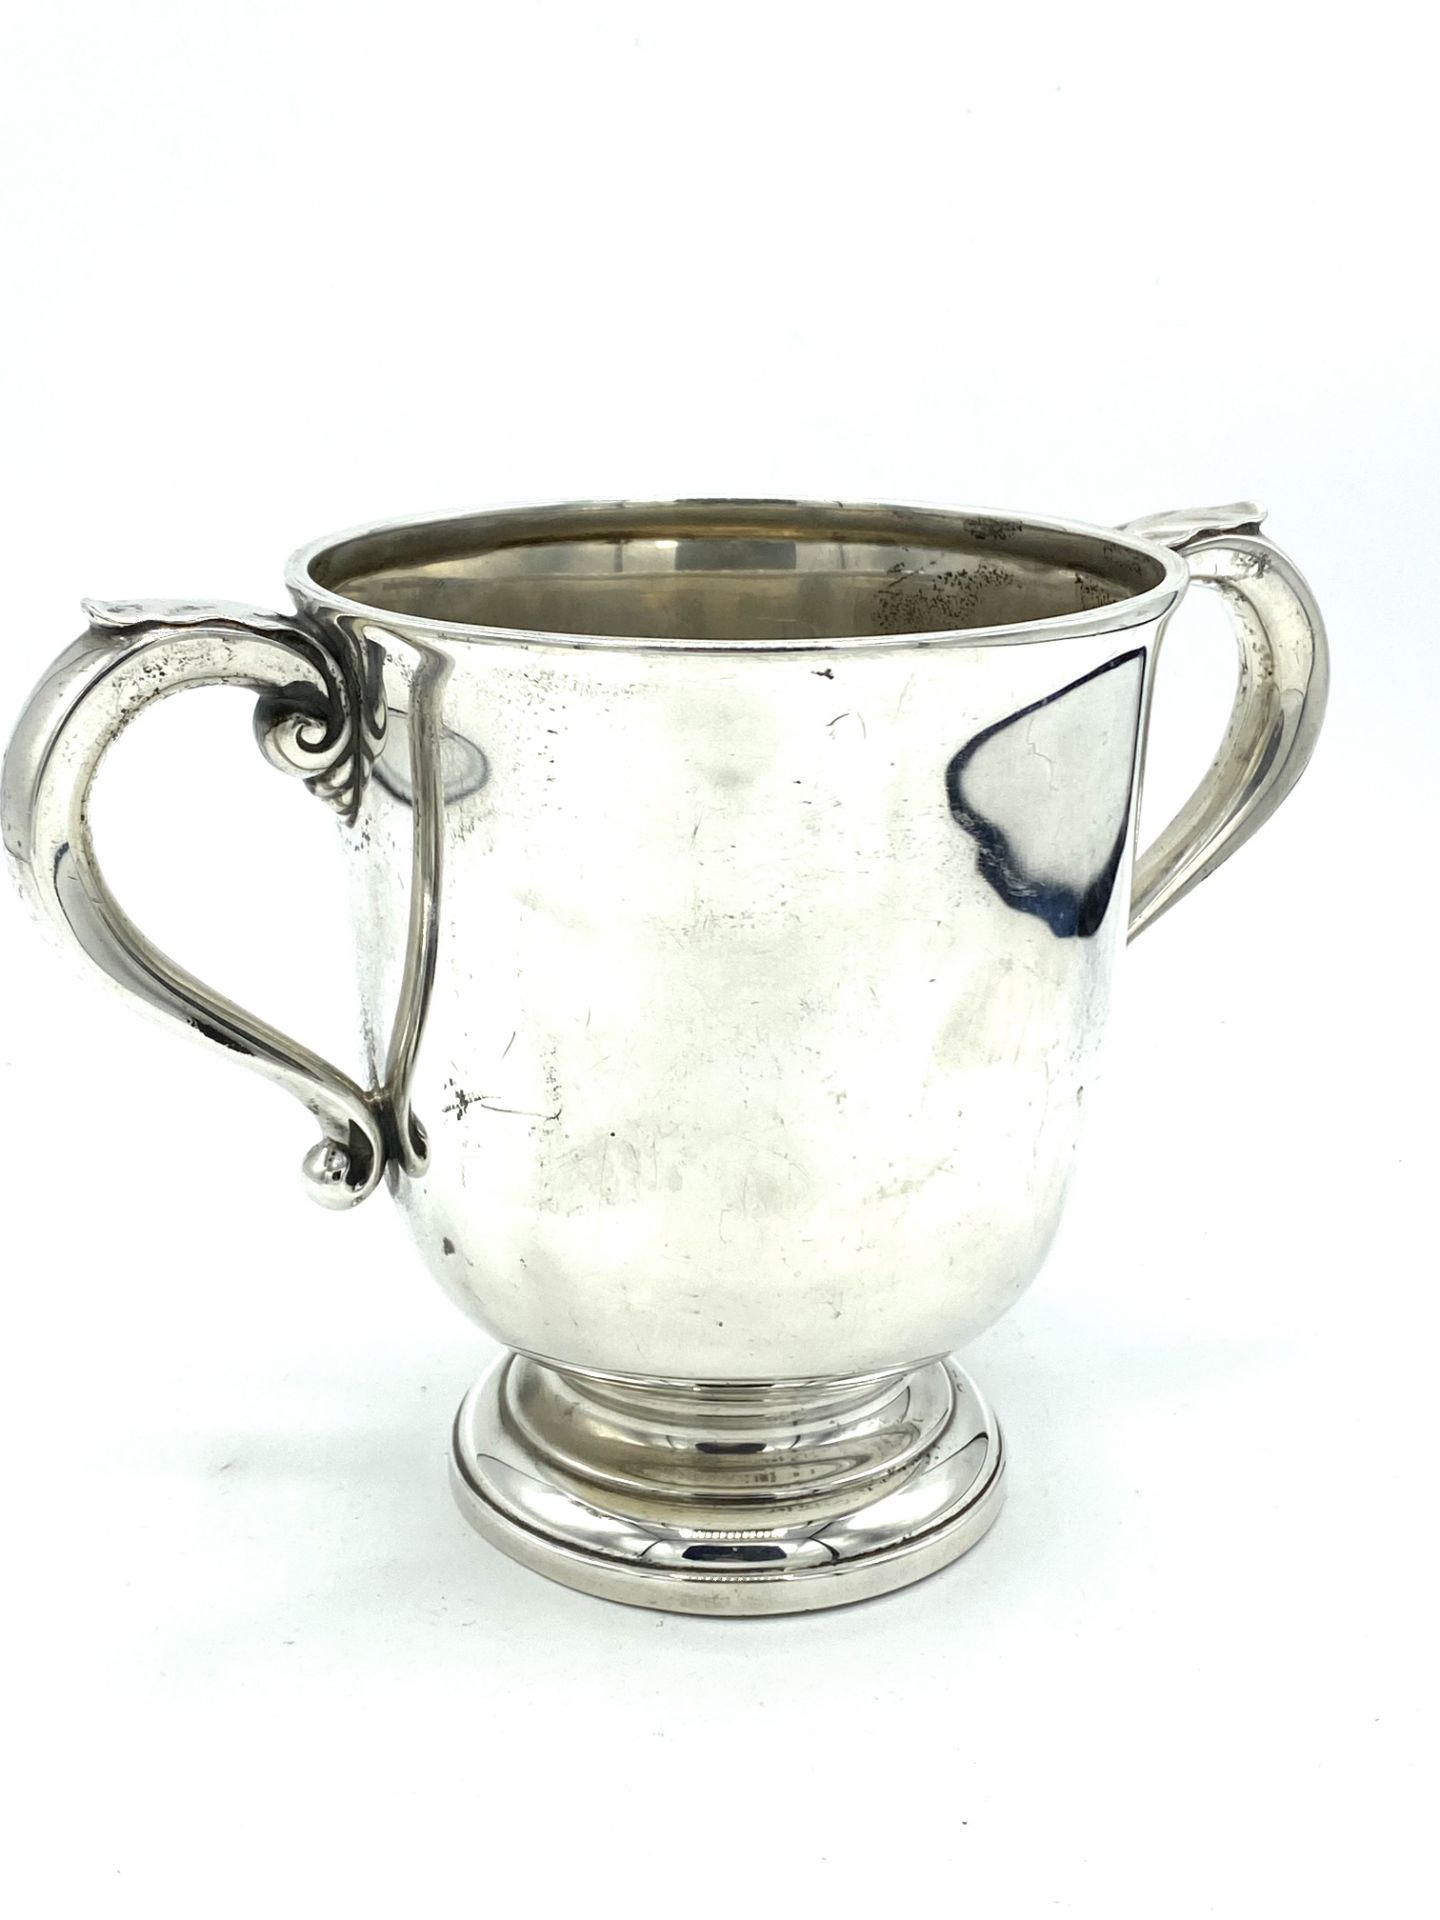 Silver twin handled trophy cup, Charles & Richard Comyns,1922